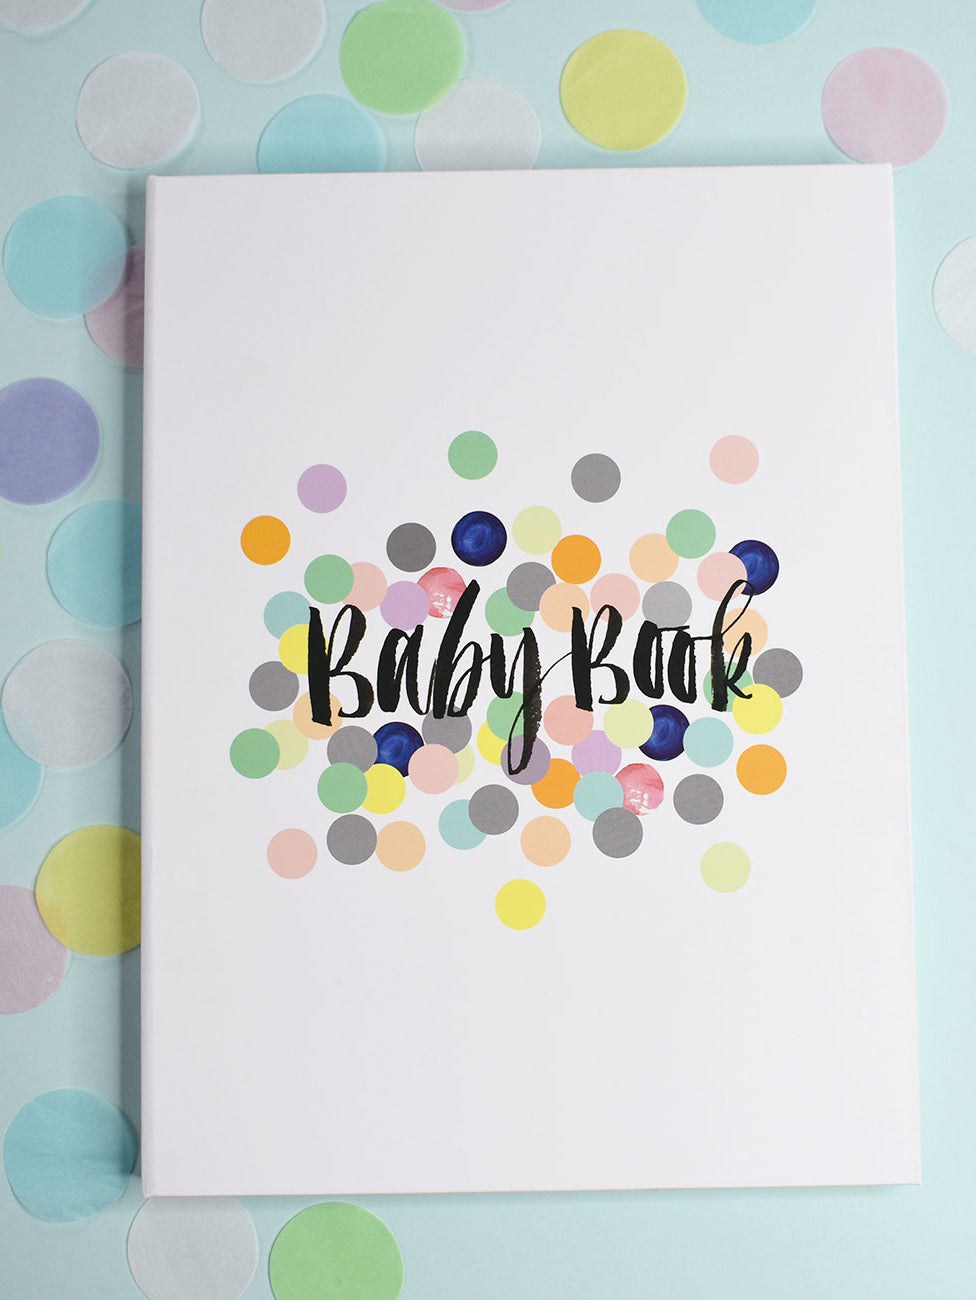 Special Edition baby book by rhicreative